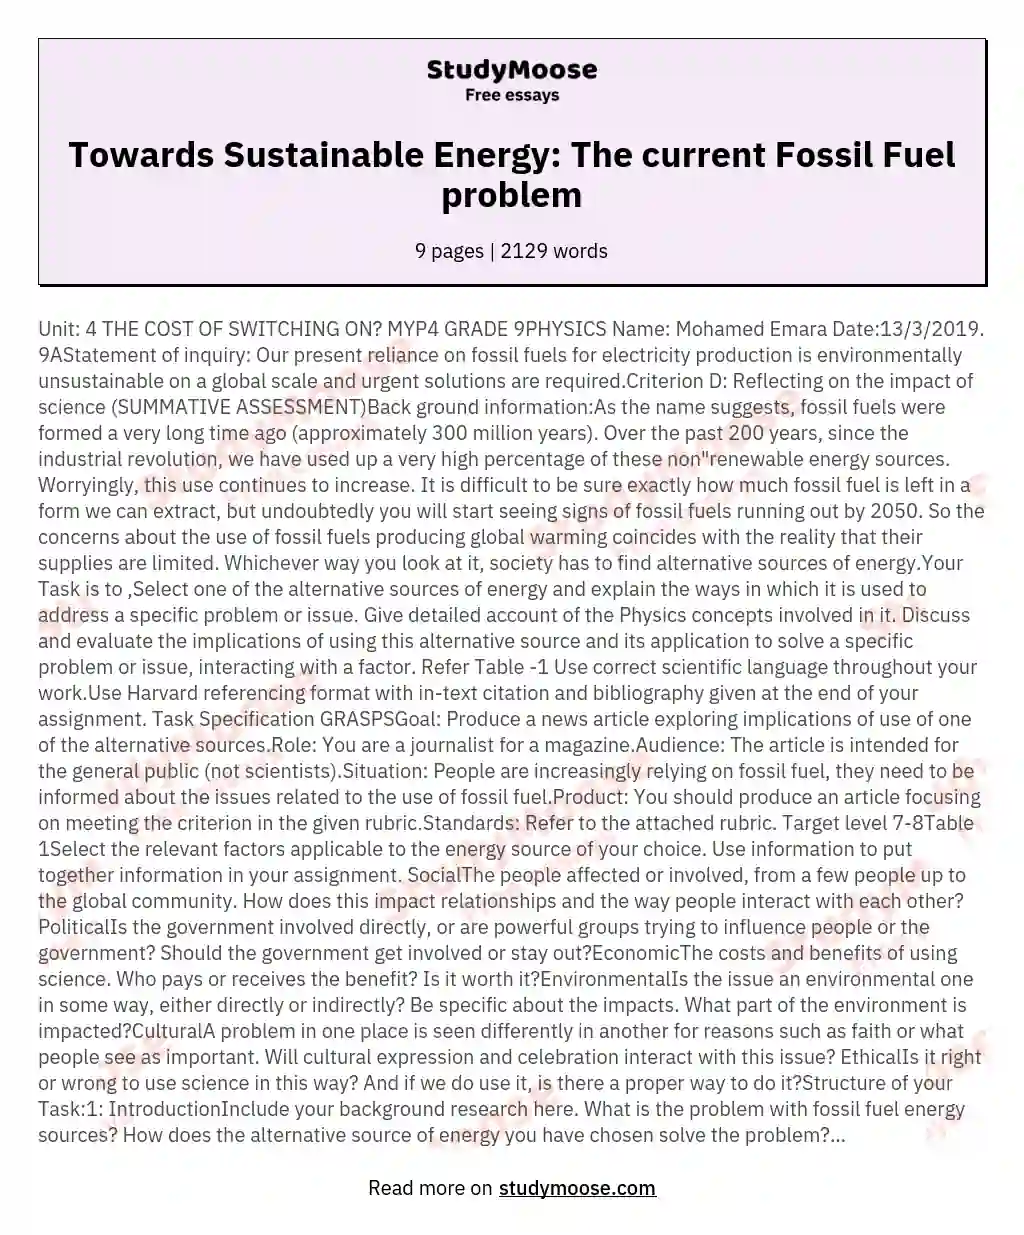 Towards Sustainable Energy: The current Fossil Fuel problem